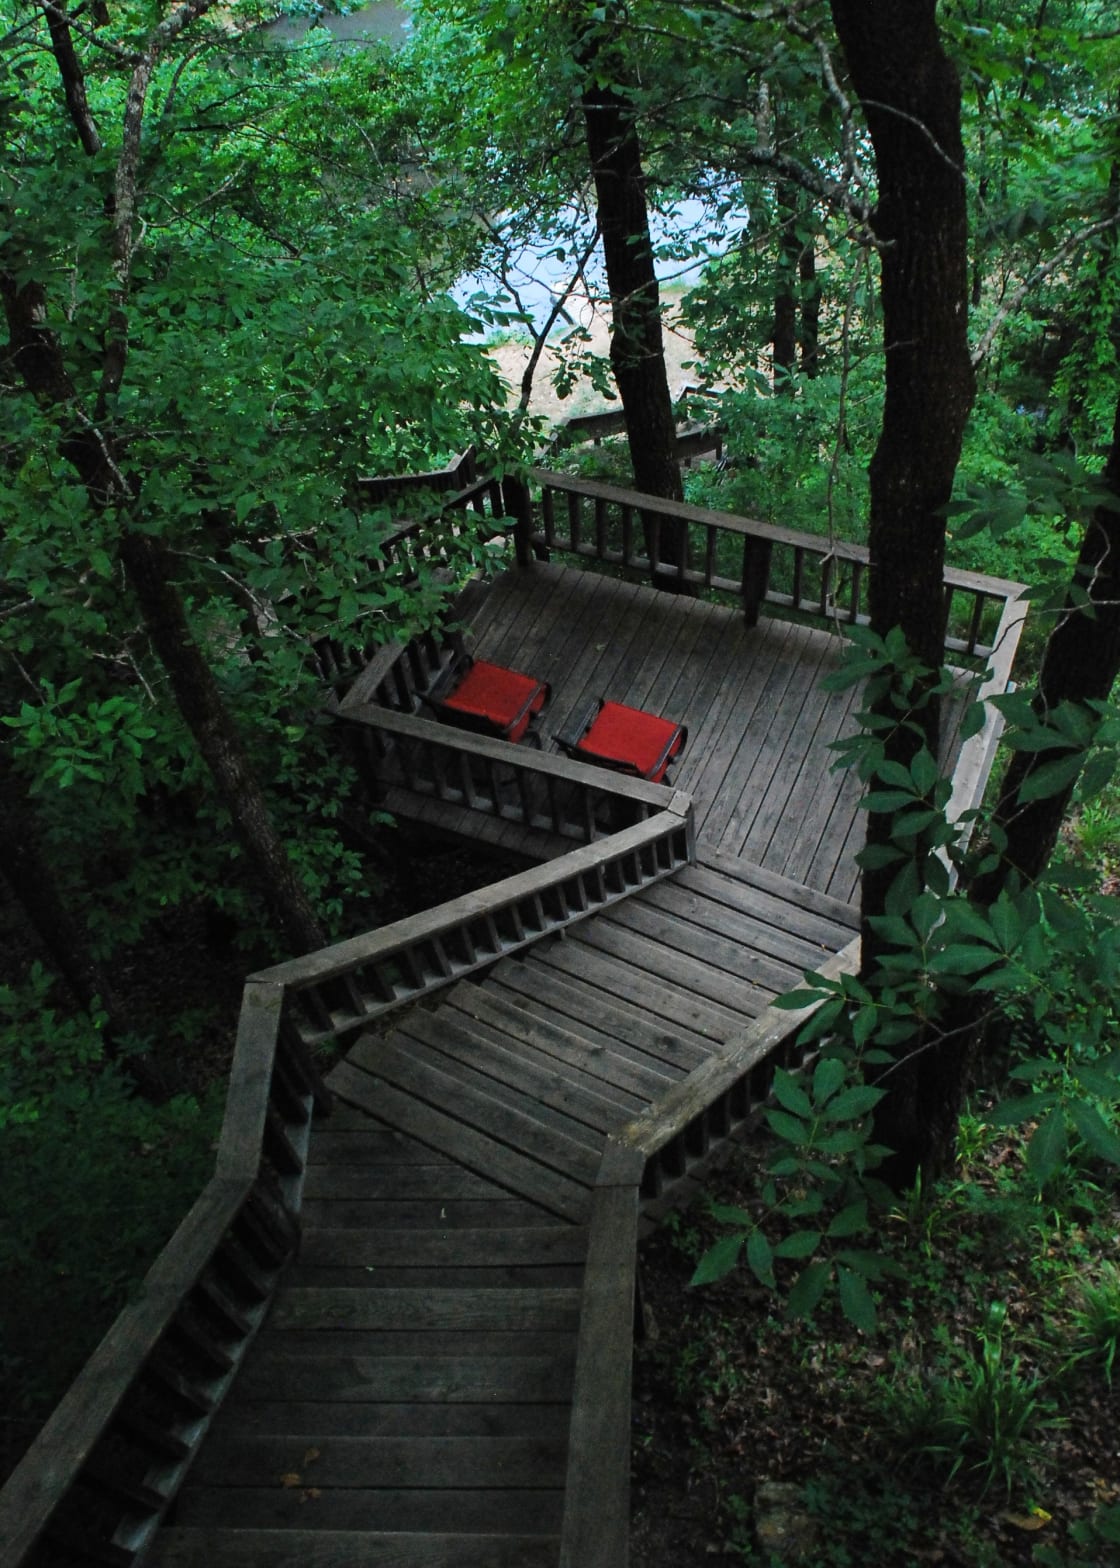 Enjoy a rest as you climb 118 steps from the river up to the topmost deck.